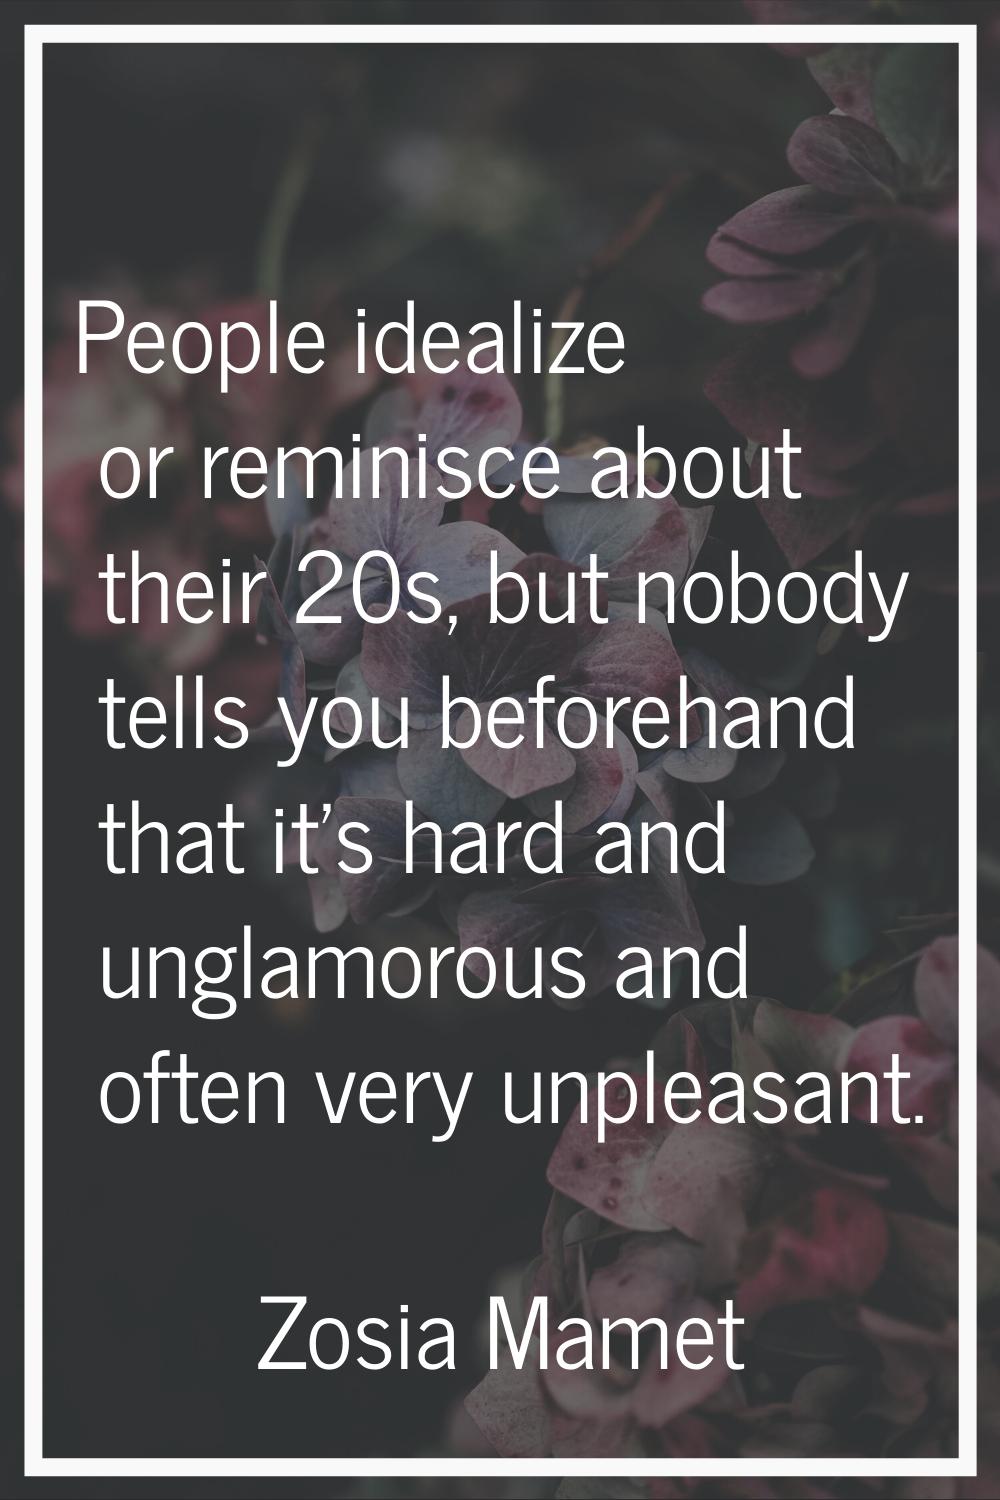 People idealize or reminisce about their 20s, but nobody tells you beforehand that it's hard and un